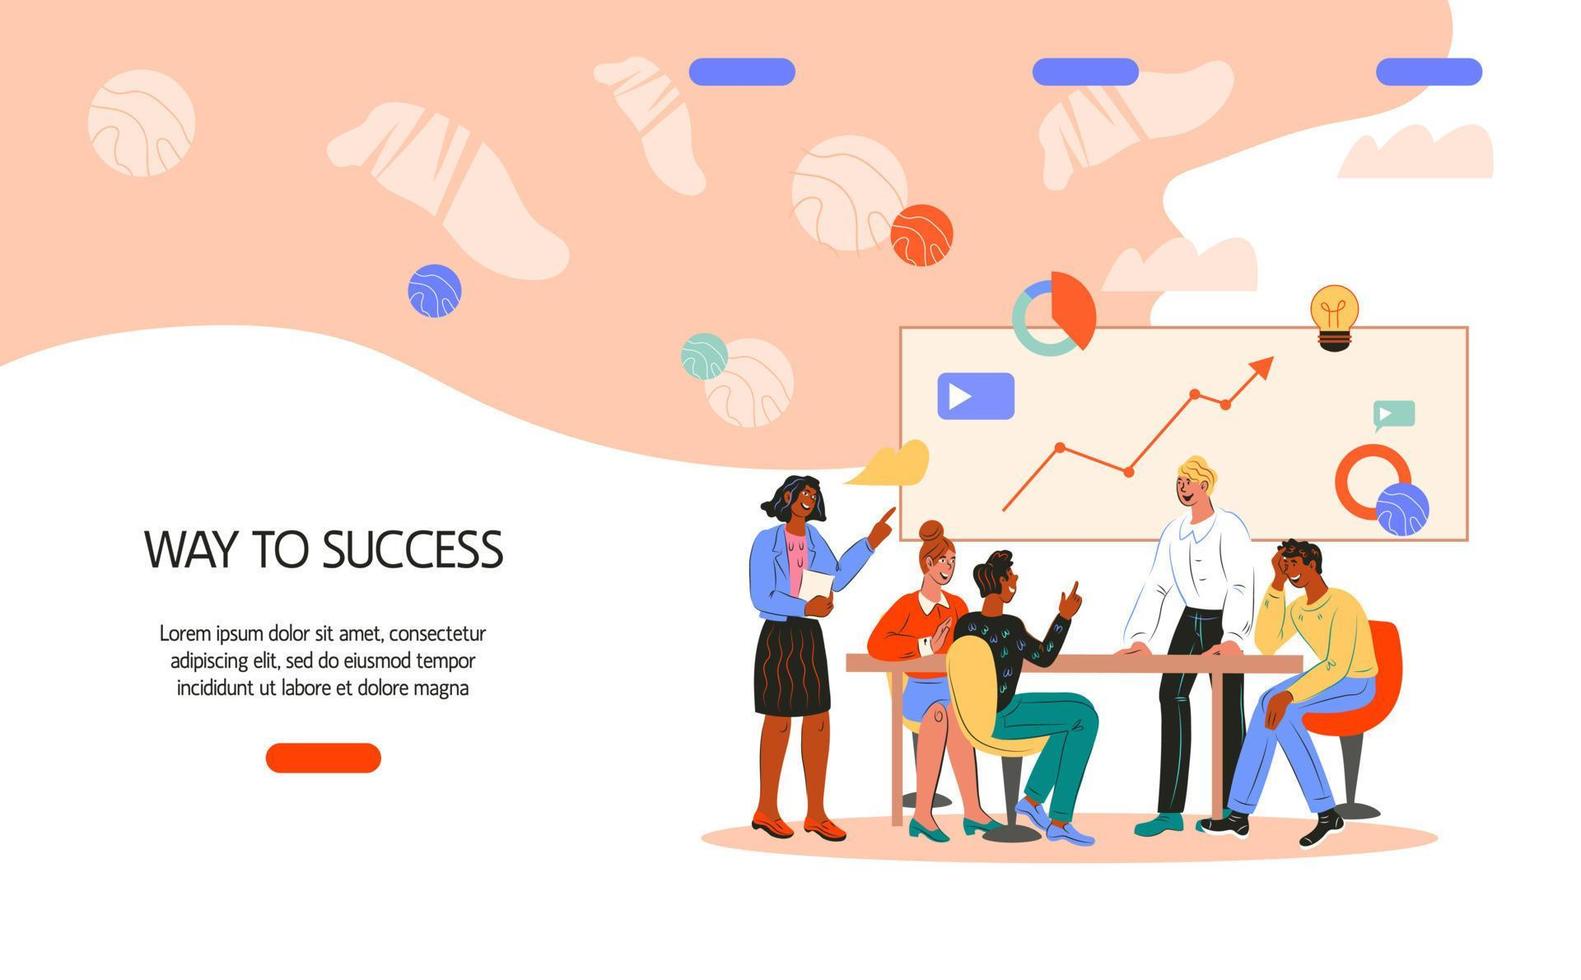 Way to success web banner template with people characters. Key to success and business chance, on the way to successful career and company growth concept. Cartoon vector illustration on white.